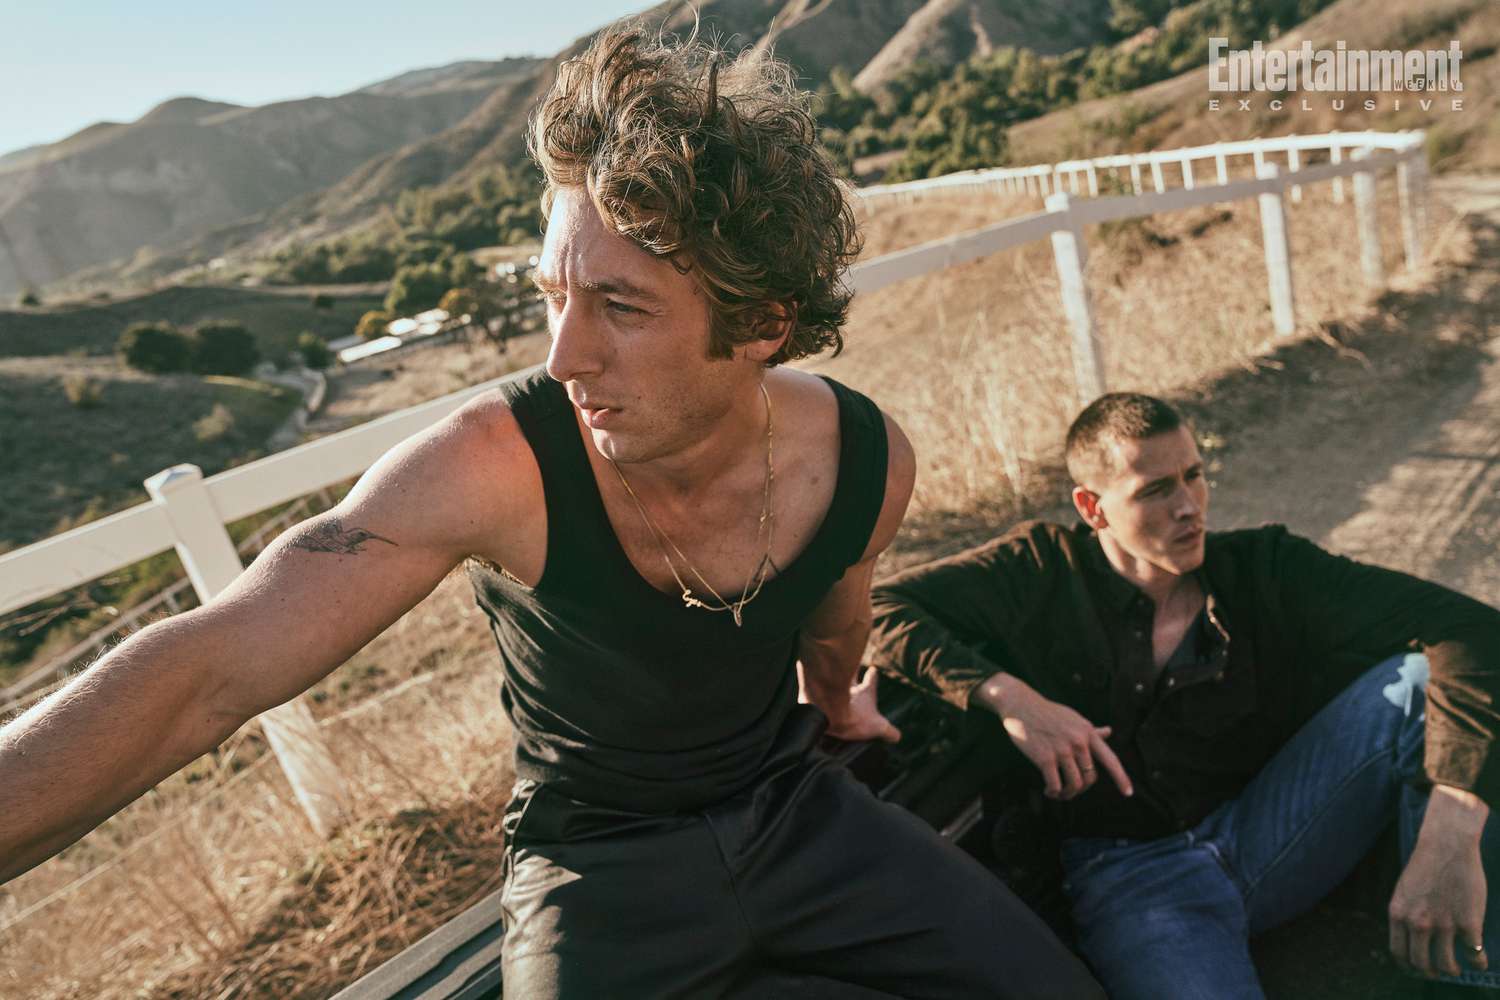 Jeremy Allen White and Harris Dickinson